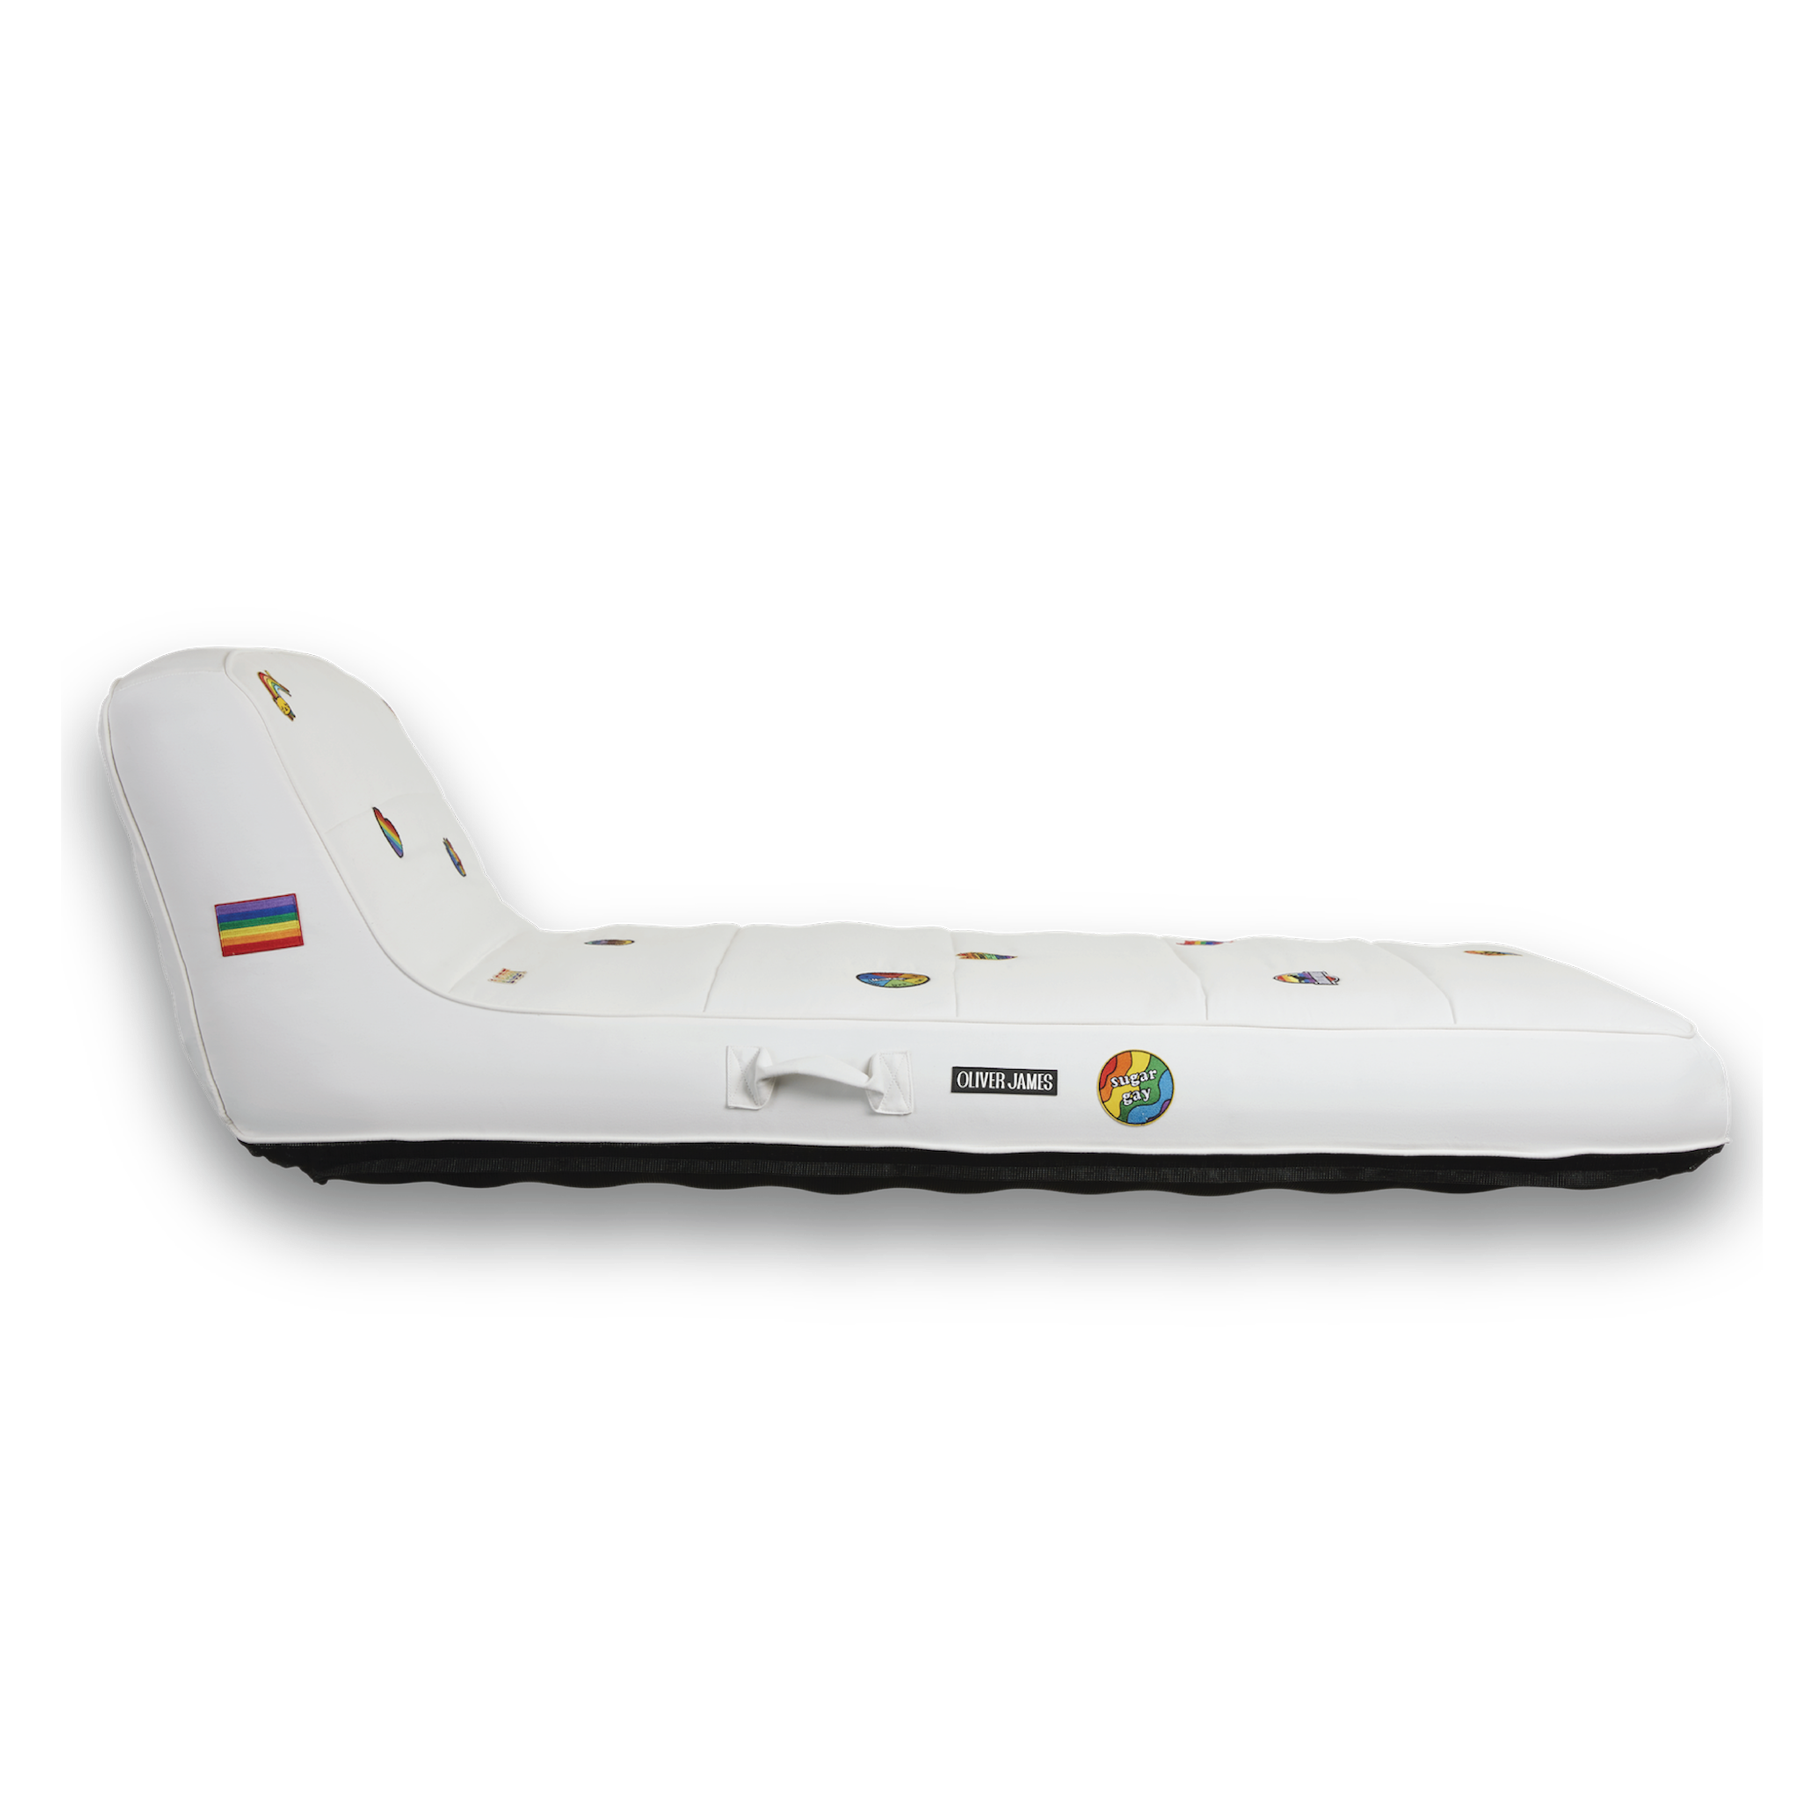 The side profile and shape of a white colored pool float for adults with LGBTQ fabric patches.